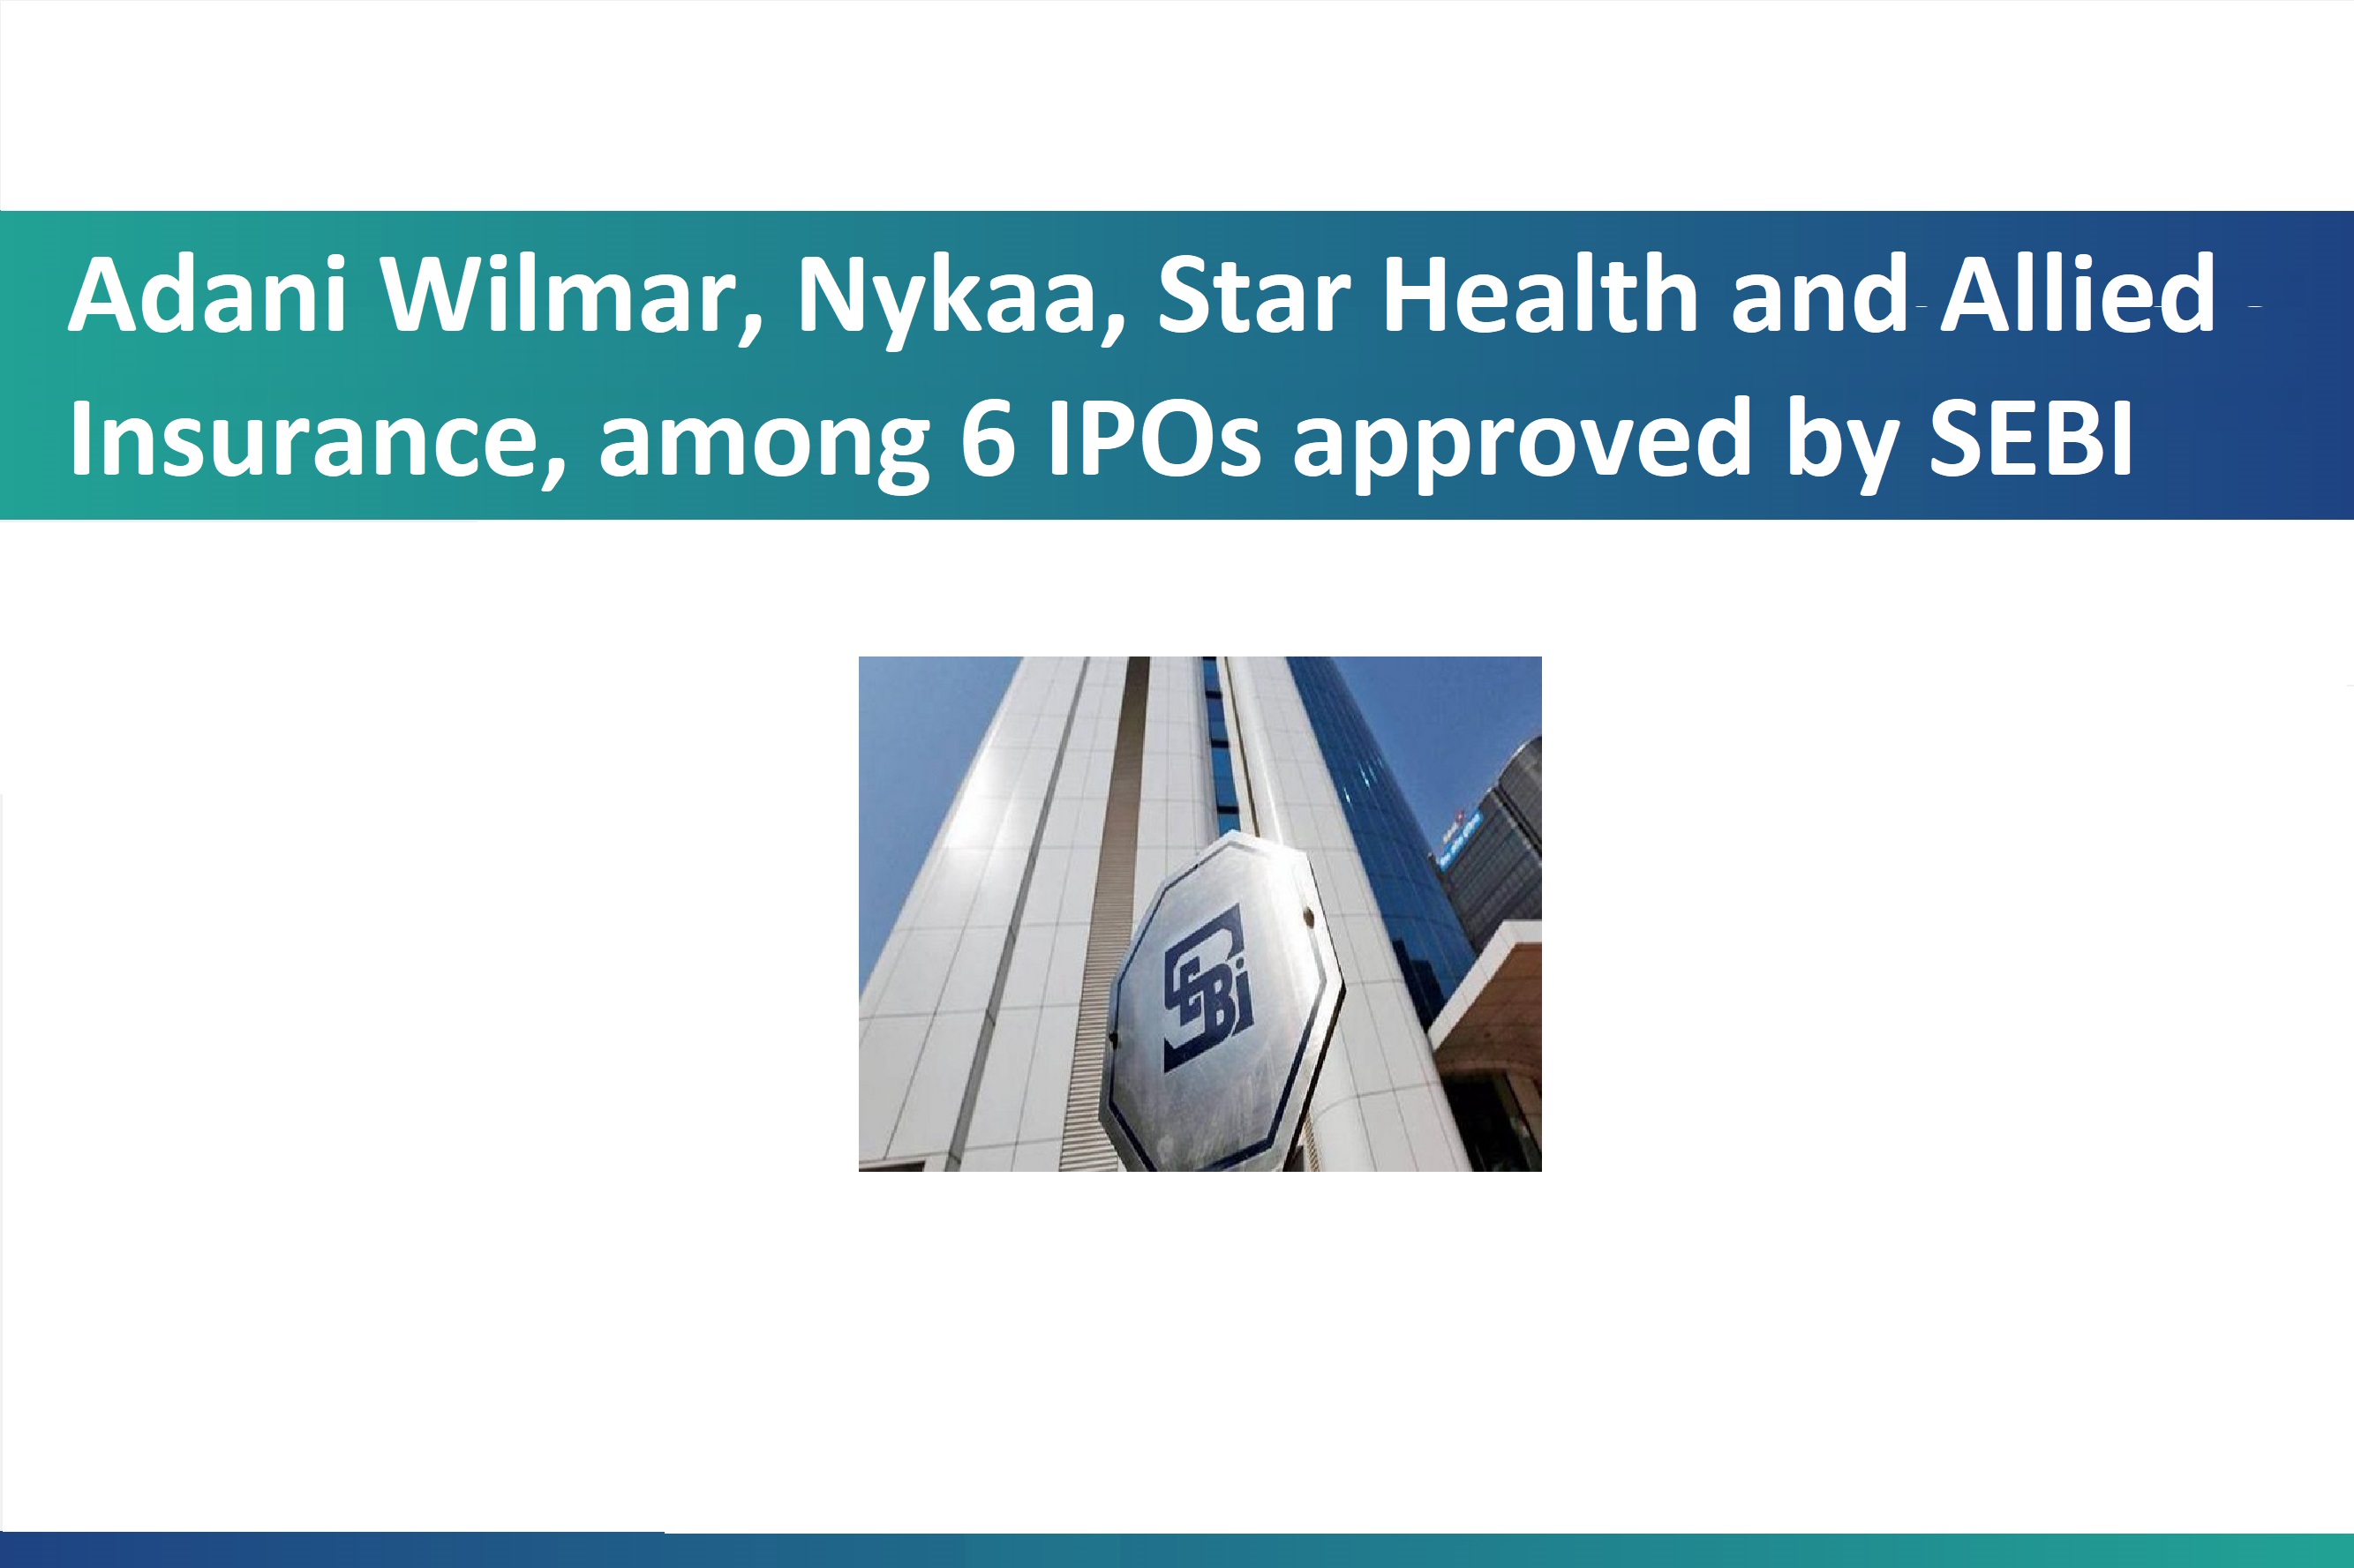 Adani Wilmar, Nykaa, Star Health and Allied Insurance, among 6 IPOs approved by SEBI